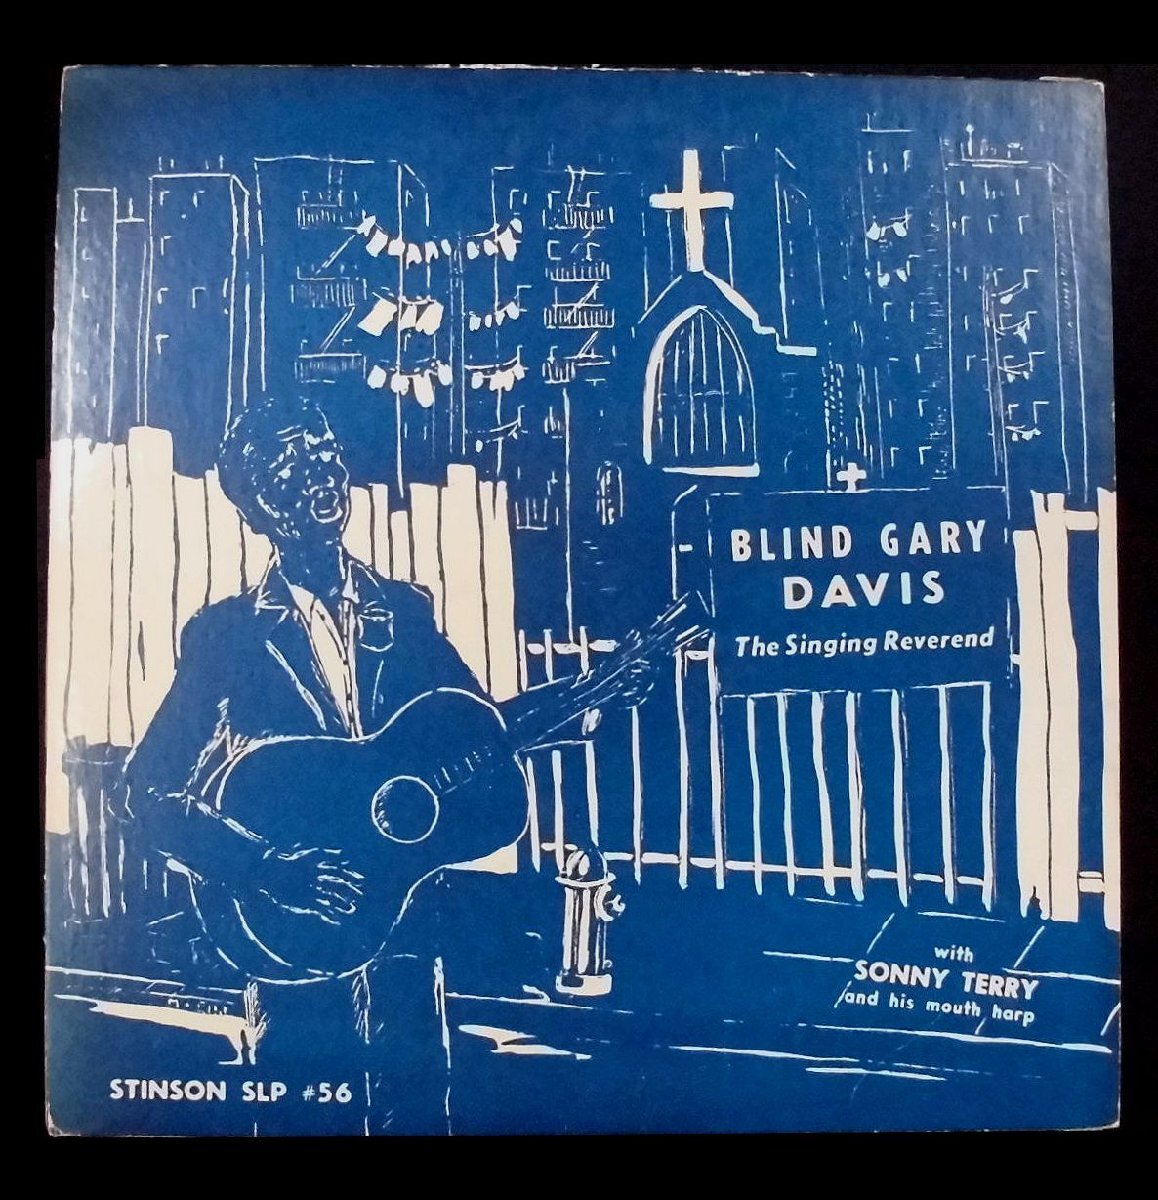 ●US-Stinson Recordsオリジナル””’54,最難関,10”,w/Booklet!!”” Blind Gary Davis w/Sonny Terry /The Singing Reverend_画像2